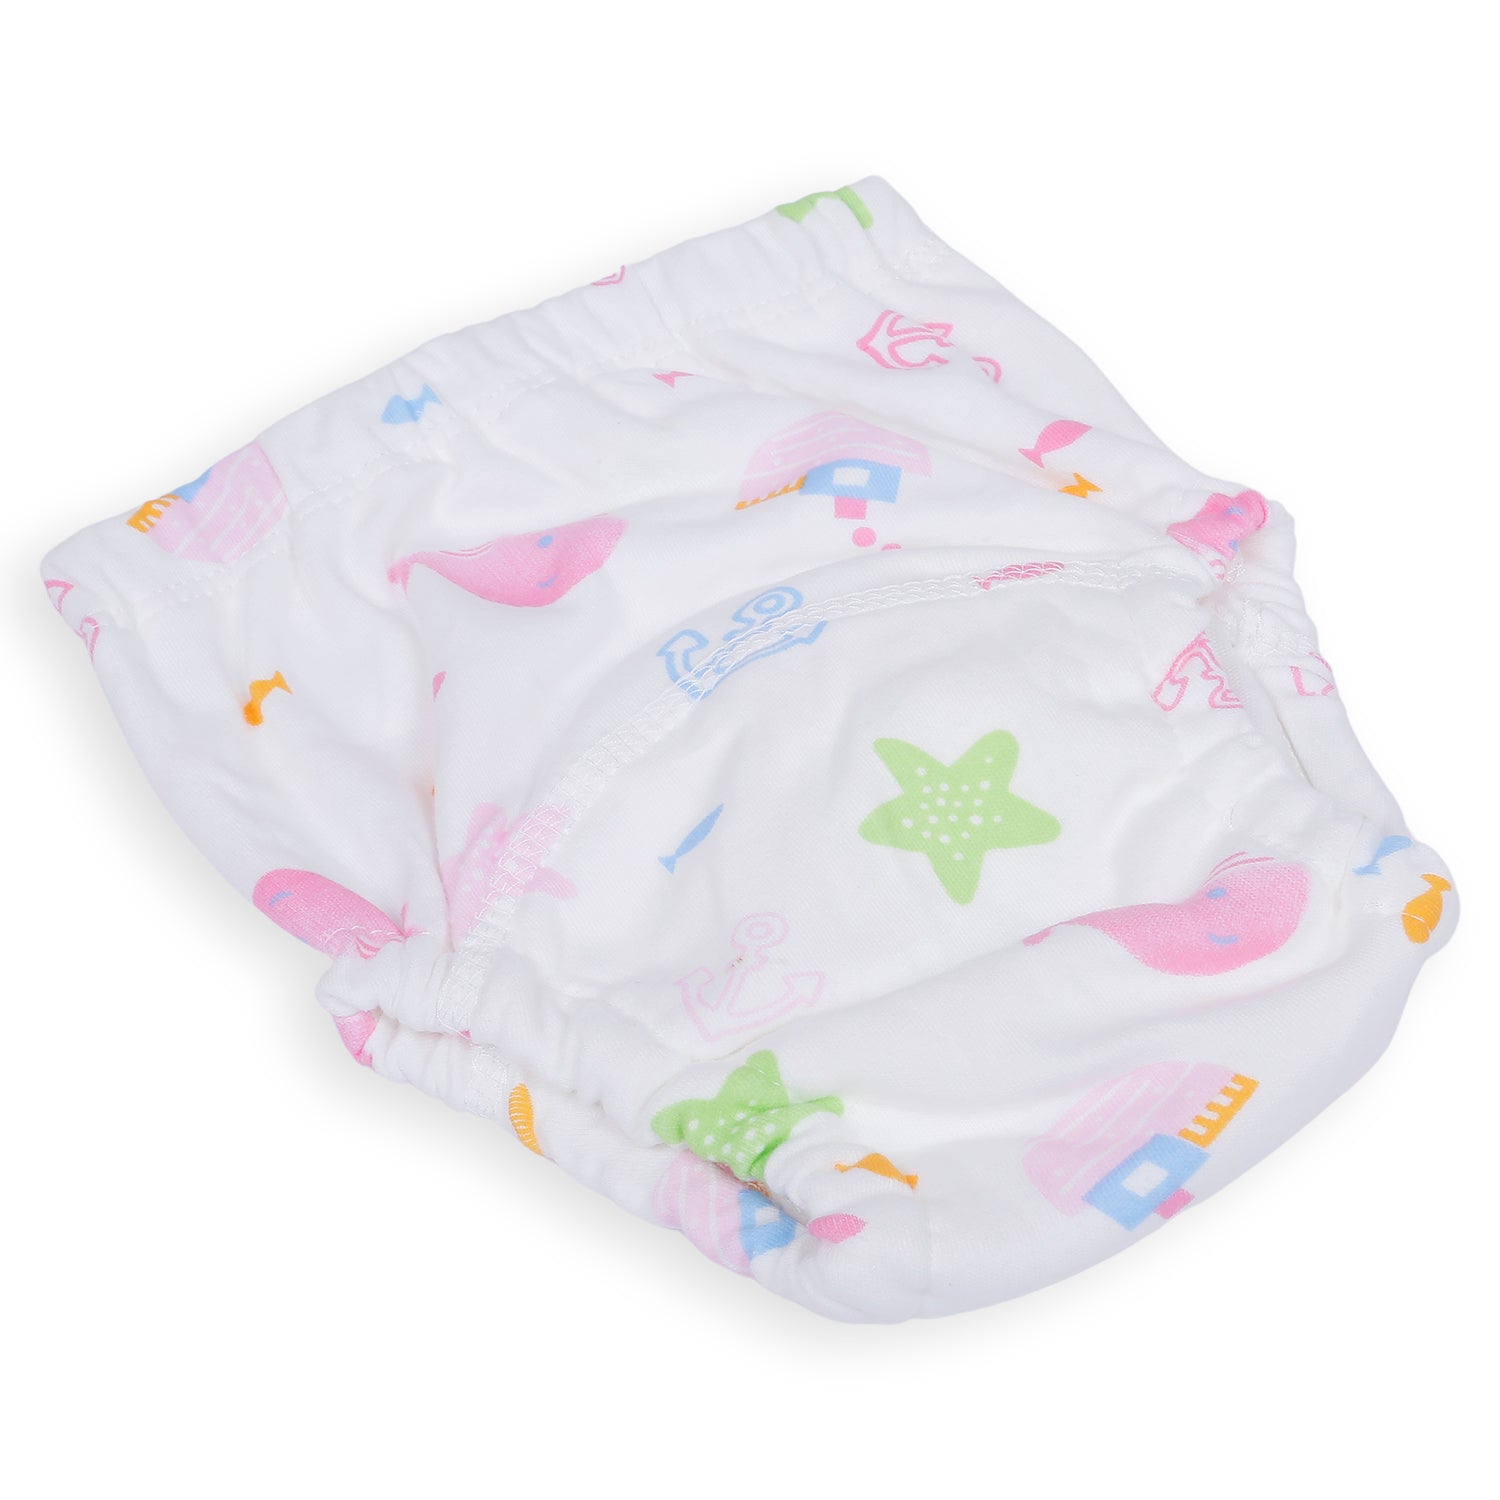 Ocean Reusable Cloth Training Pants Clothing Accessory Diaper Panty - Multicolour - Baby Moo